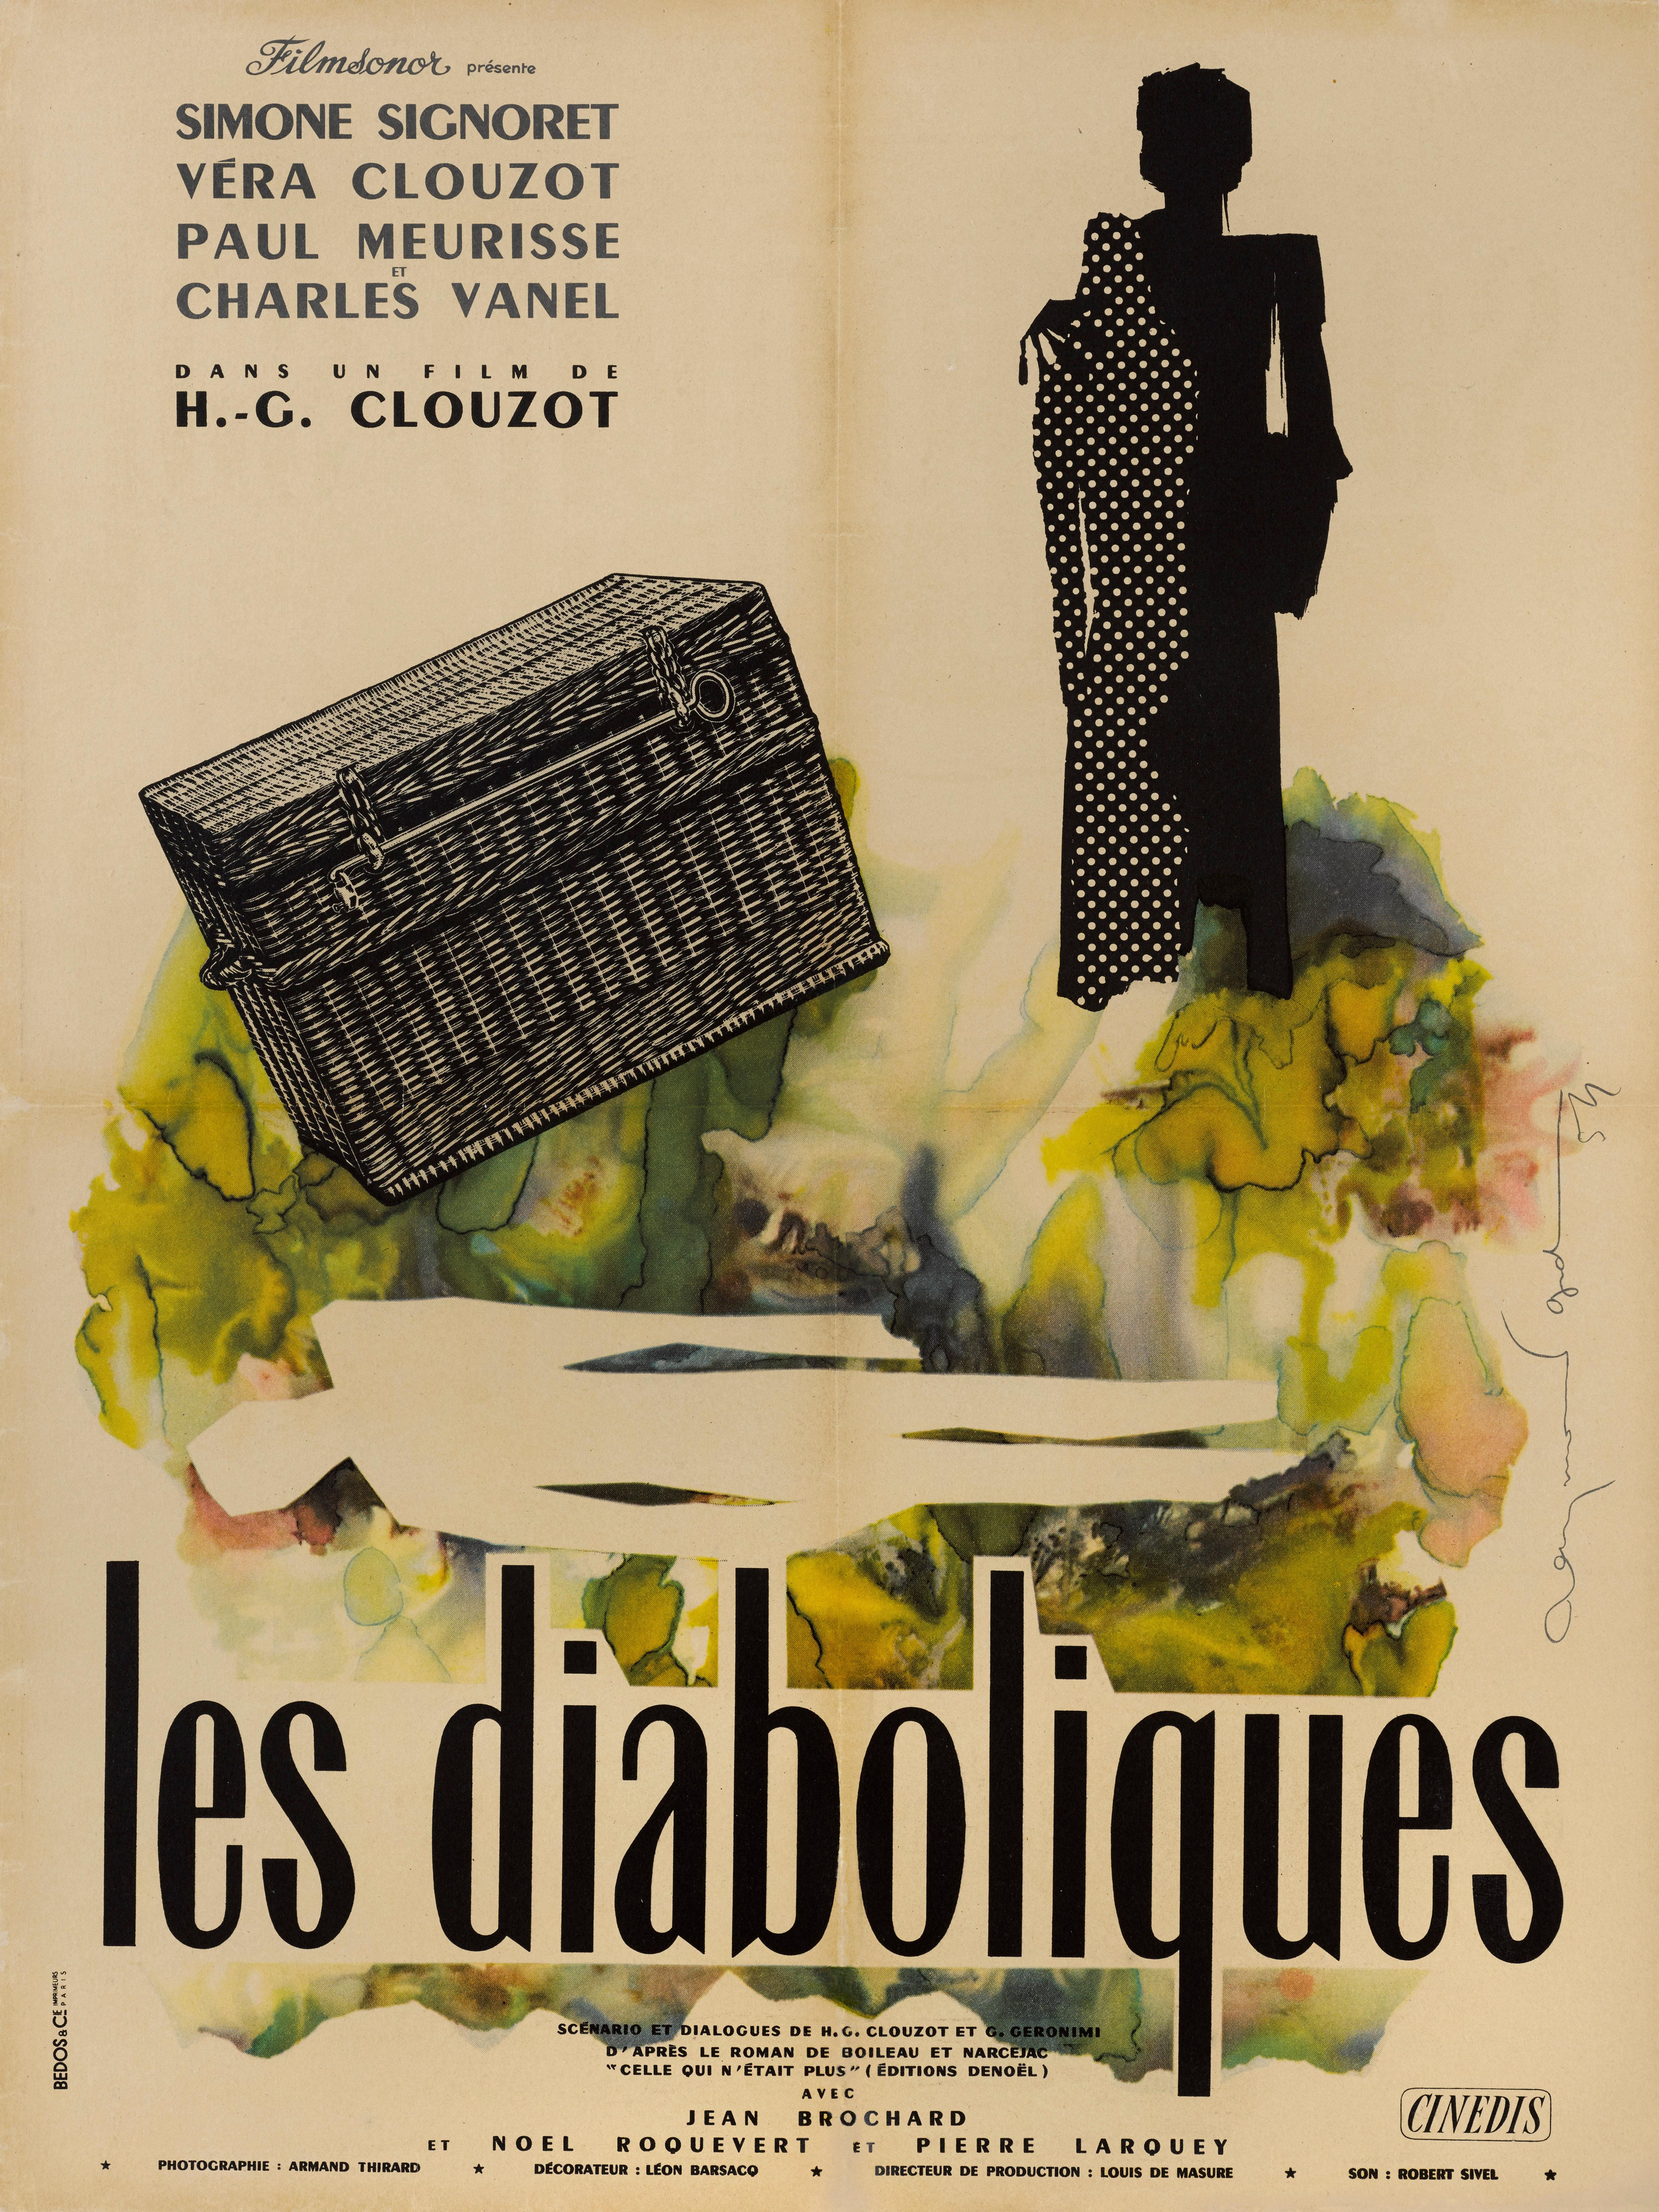 Original 1955 French film poster.
The director Henri Clouzot competed with Alfred Hitchcock for the rights to this film. The plot, a murder conspiracy that spirals out of control, was irresistible to both of them.
The French graphic artist and